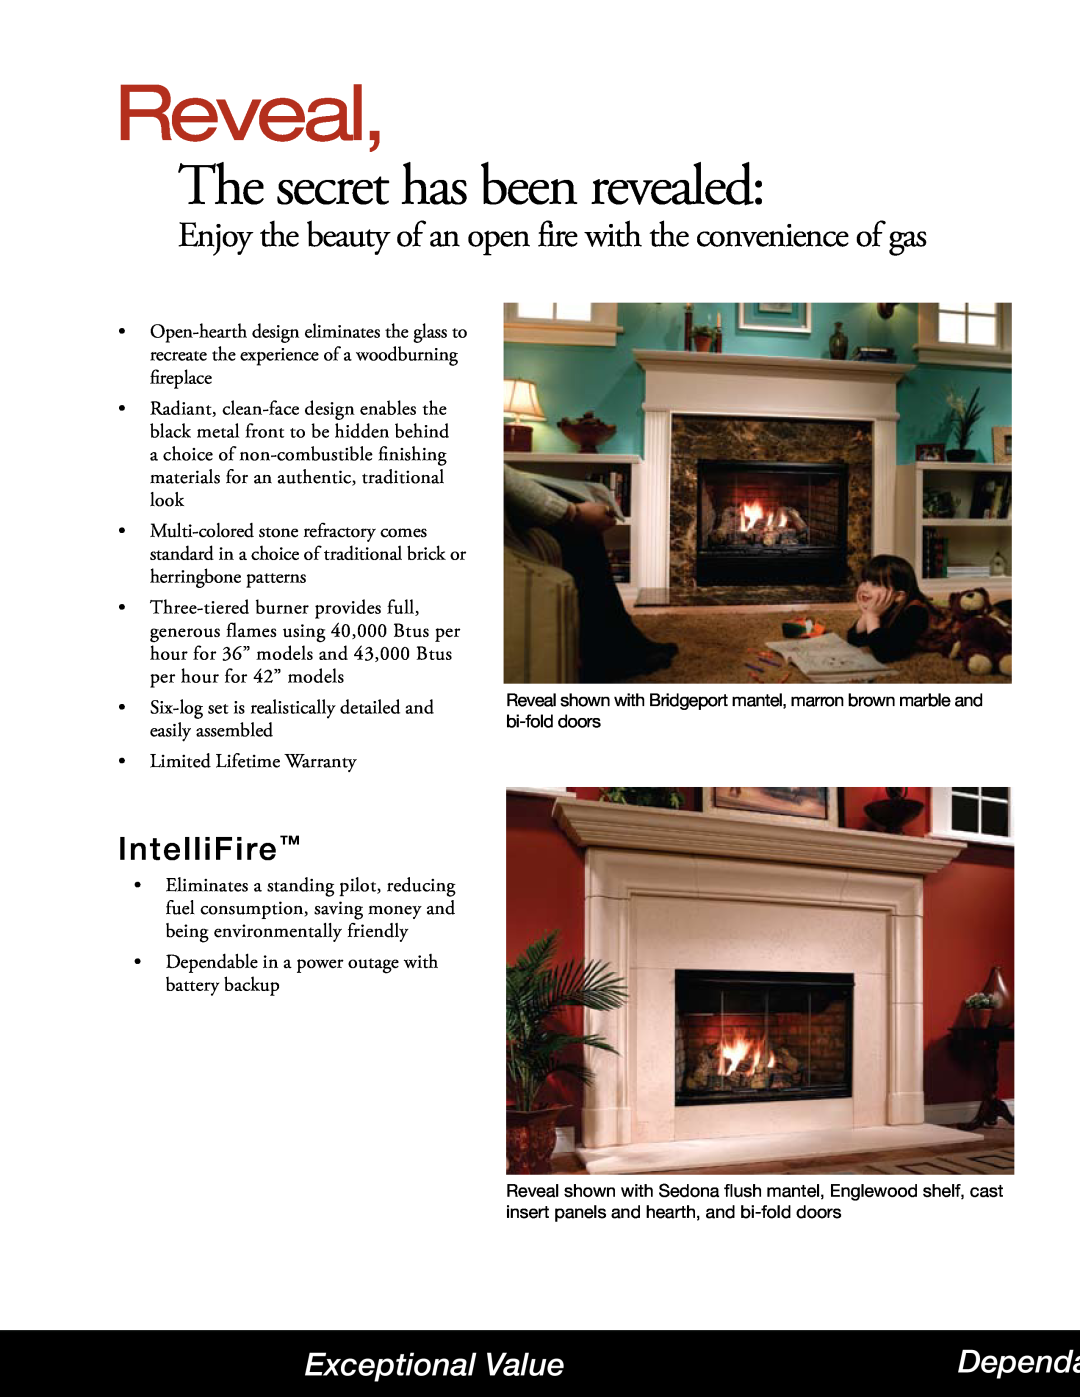 Hearth and Home Technologies RBV4236I manual Exceptional Value, Reveal, The secret has been revealed, IntelliFire, Dependa 